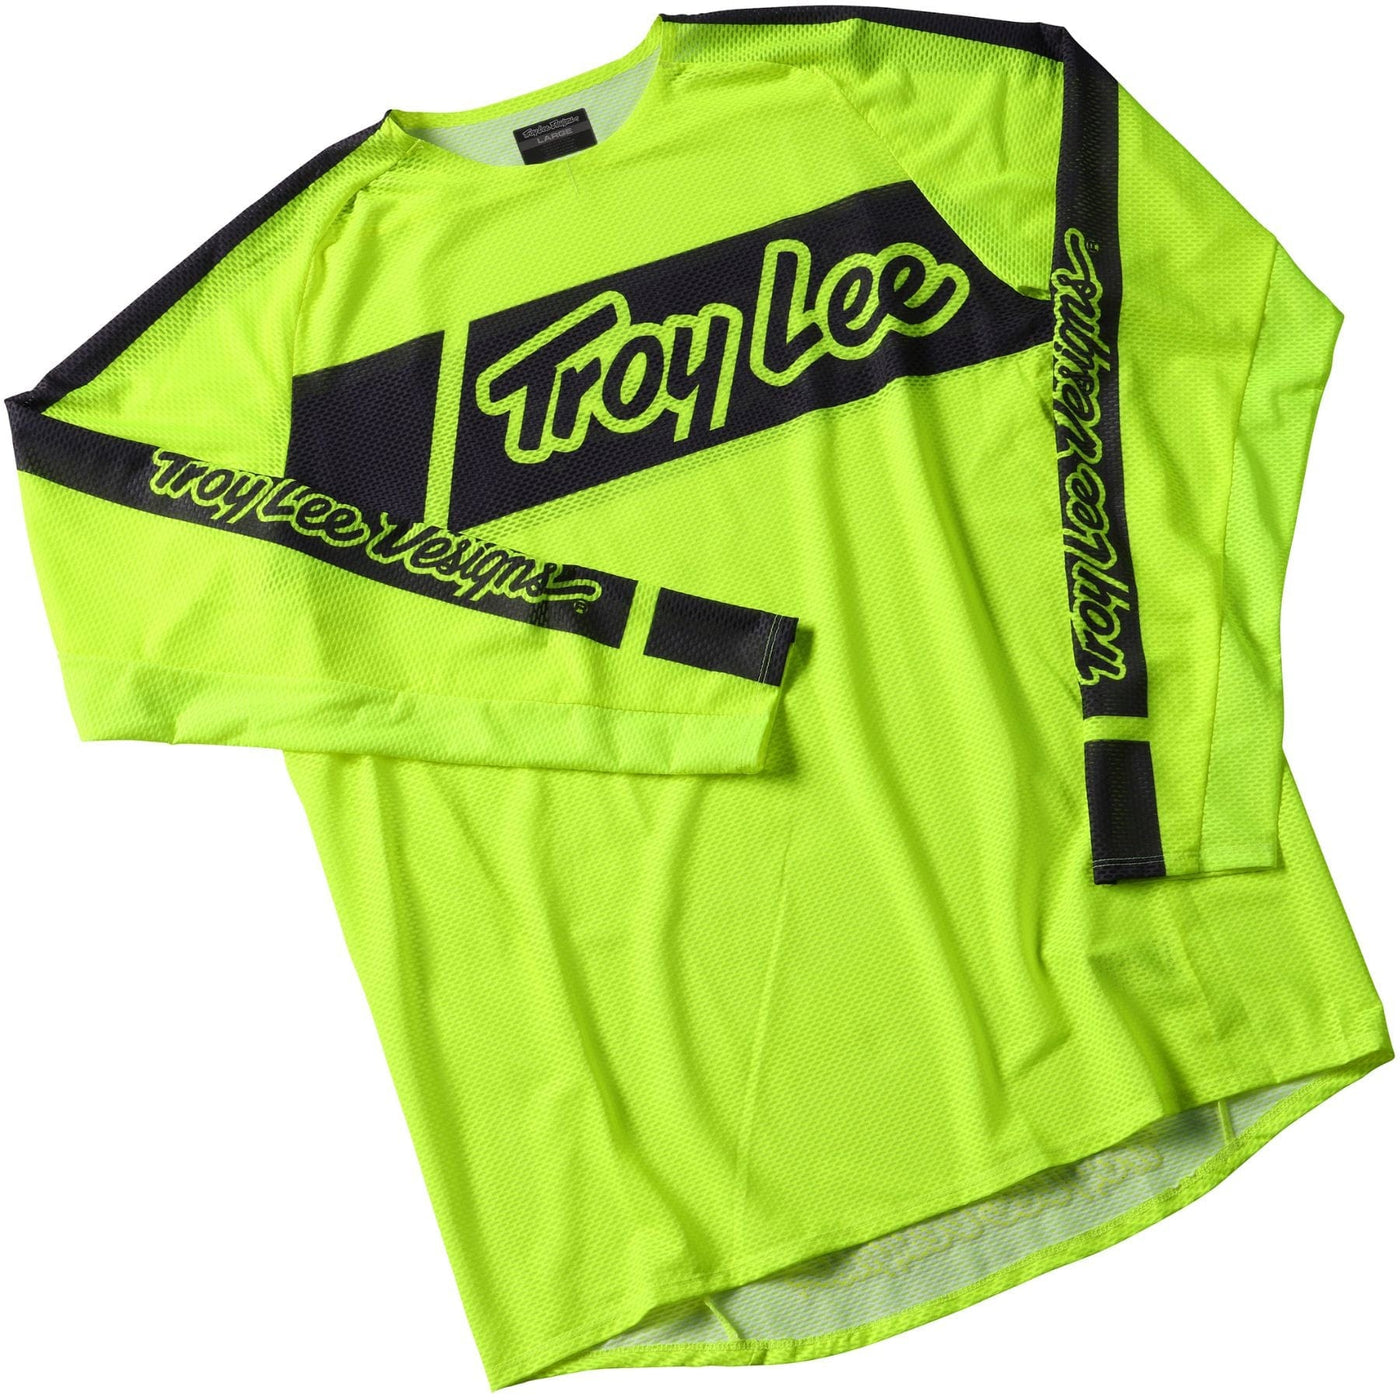 Troy Lee Designs SE PRO AIR Jersey Vox - Flo Yellow 8Lines Shop - Fast Shipping